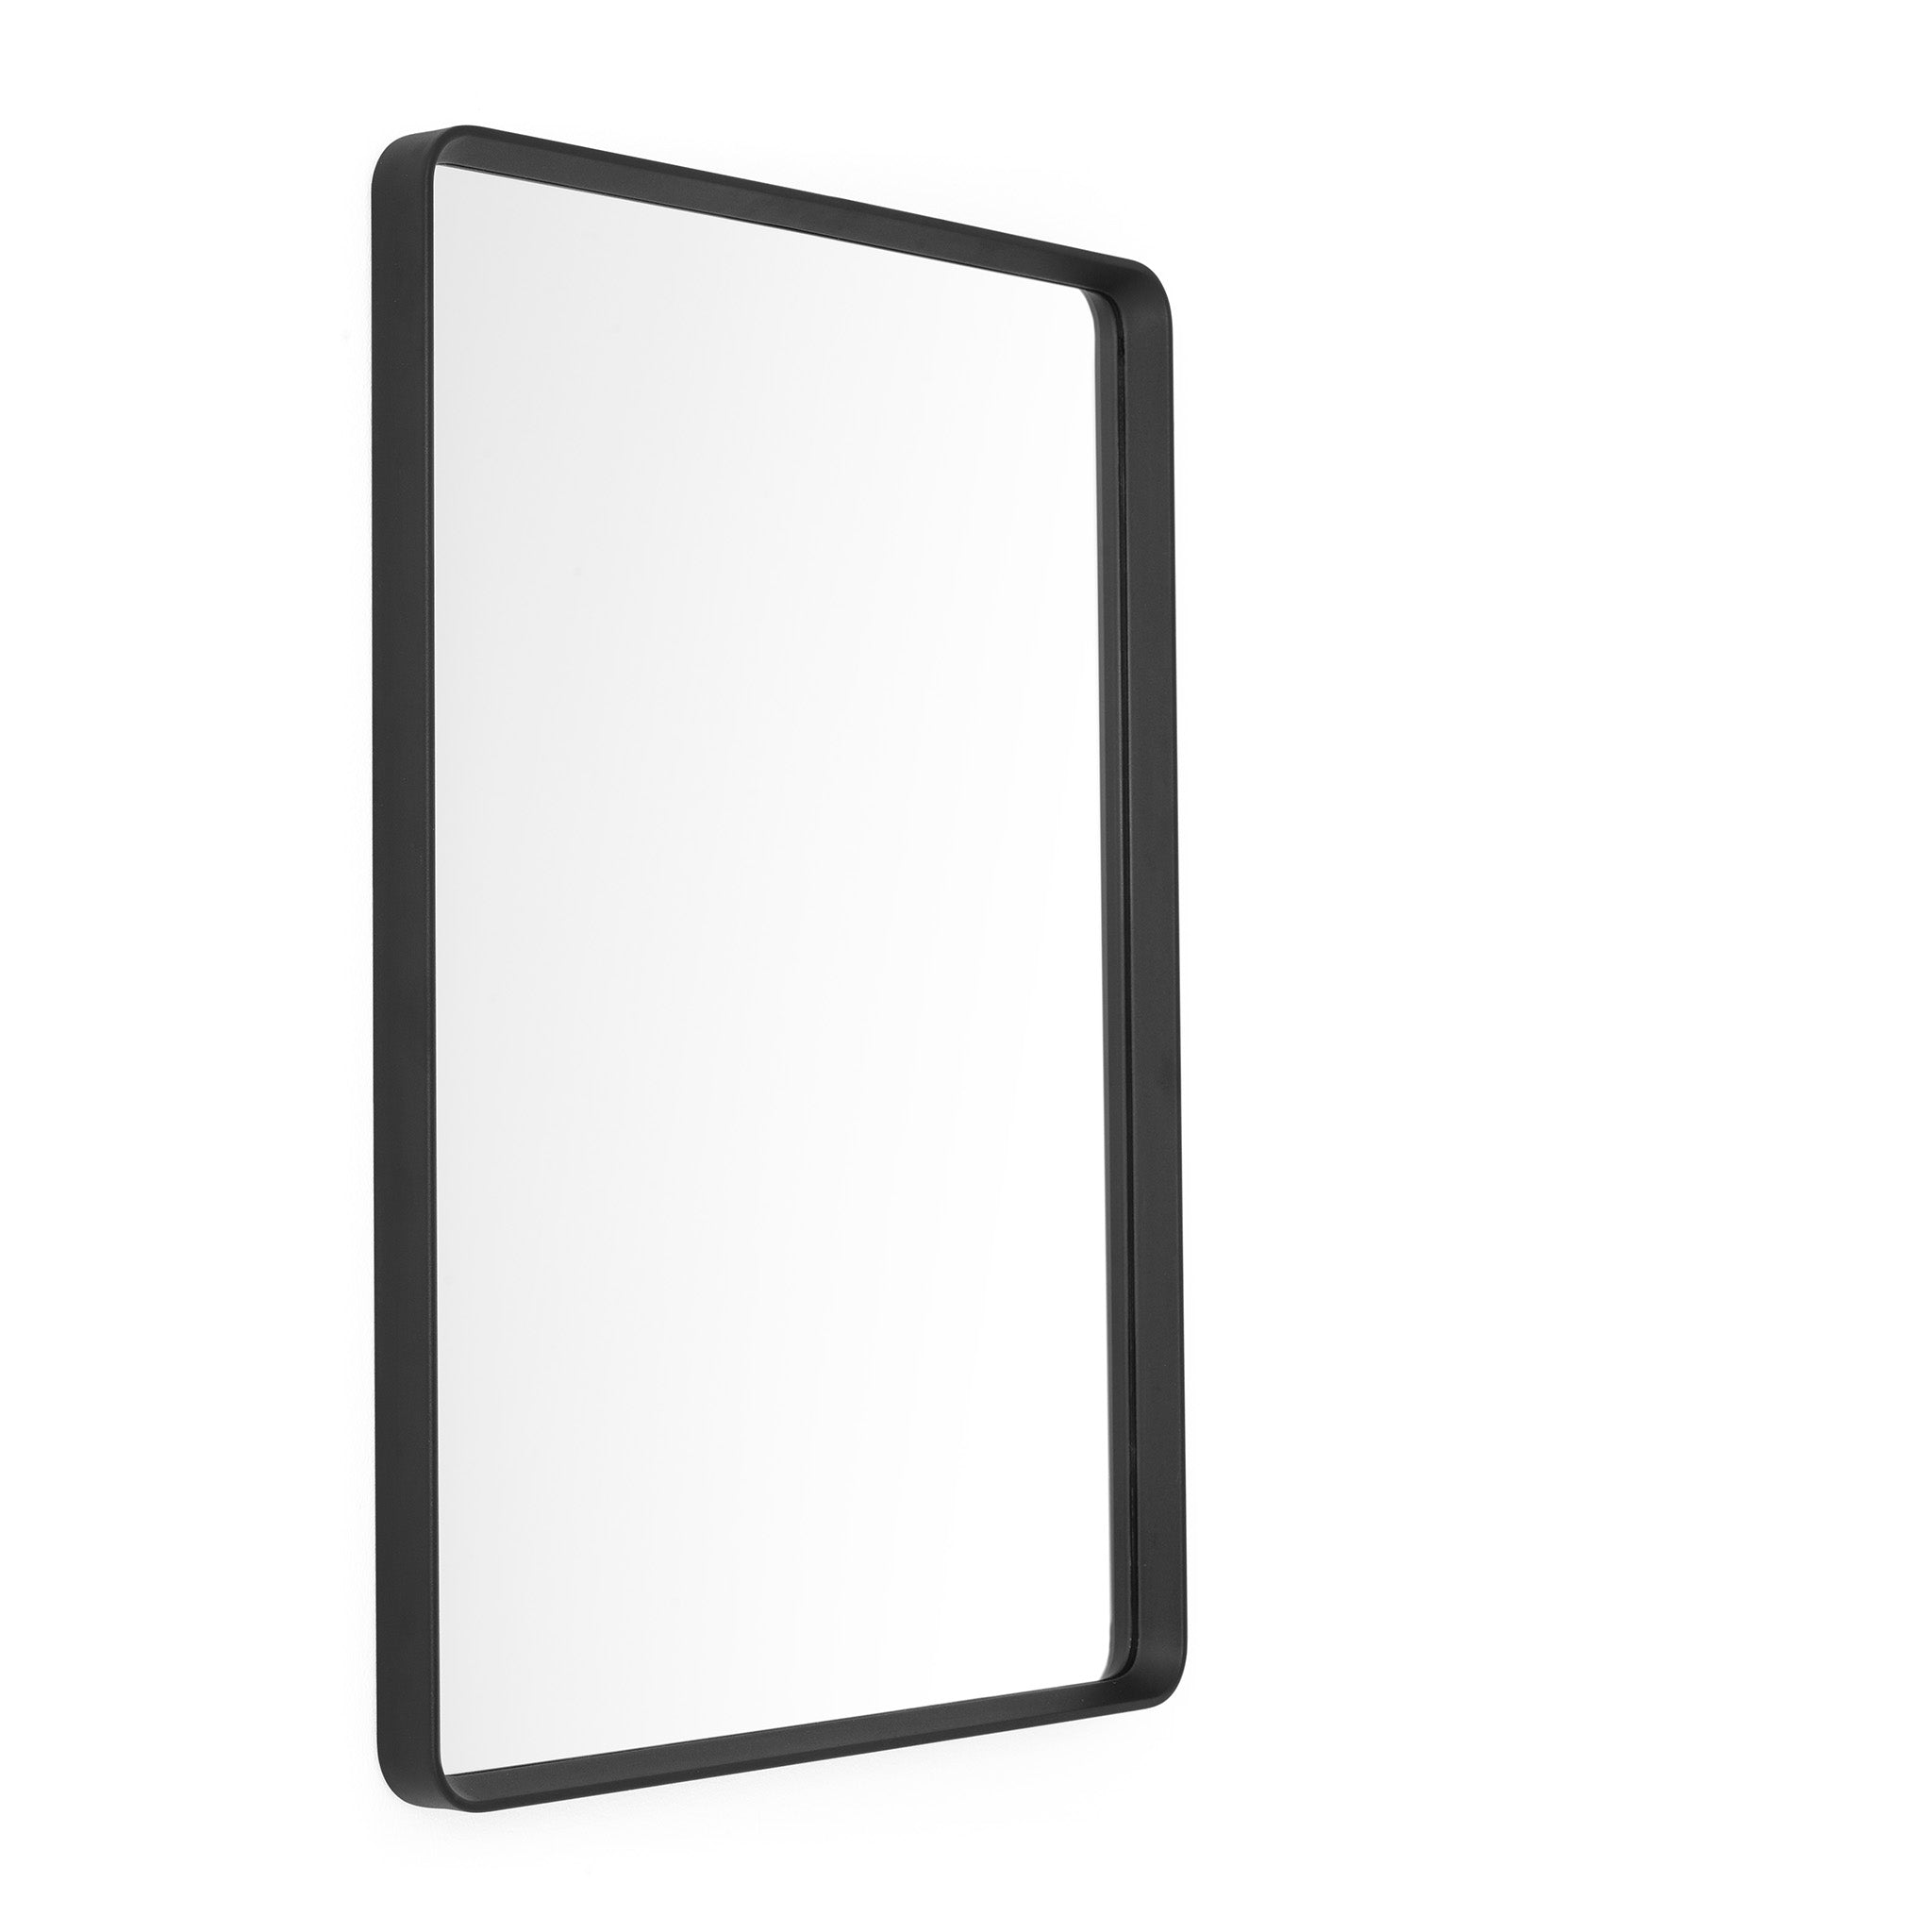 Norm Rectangular Wall Mirror by Norm Architects